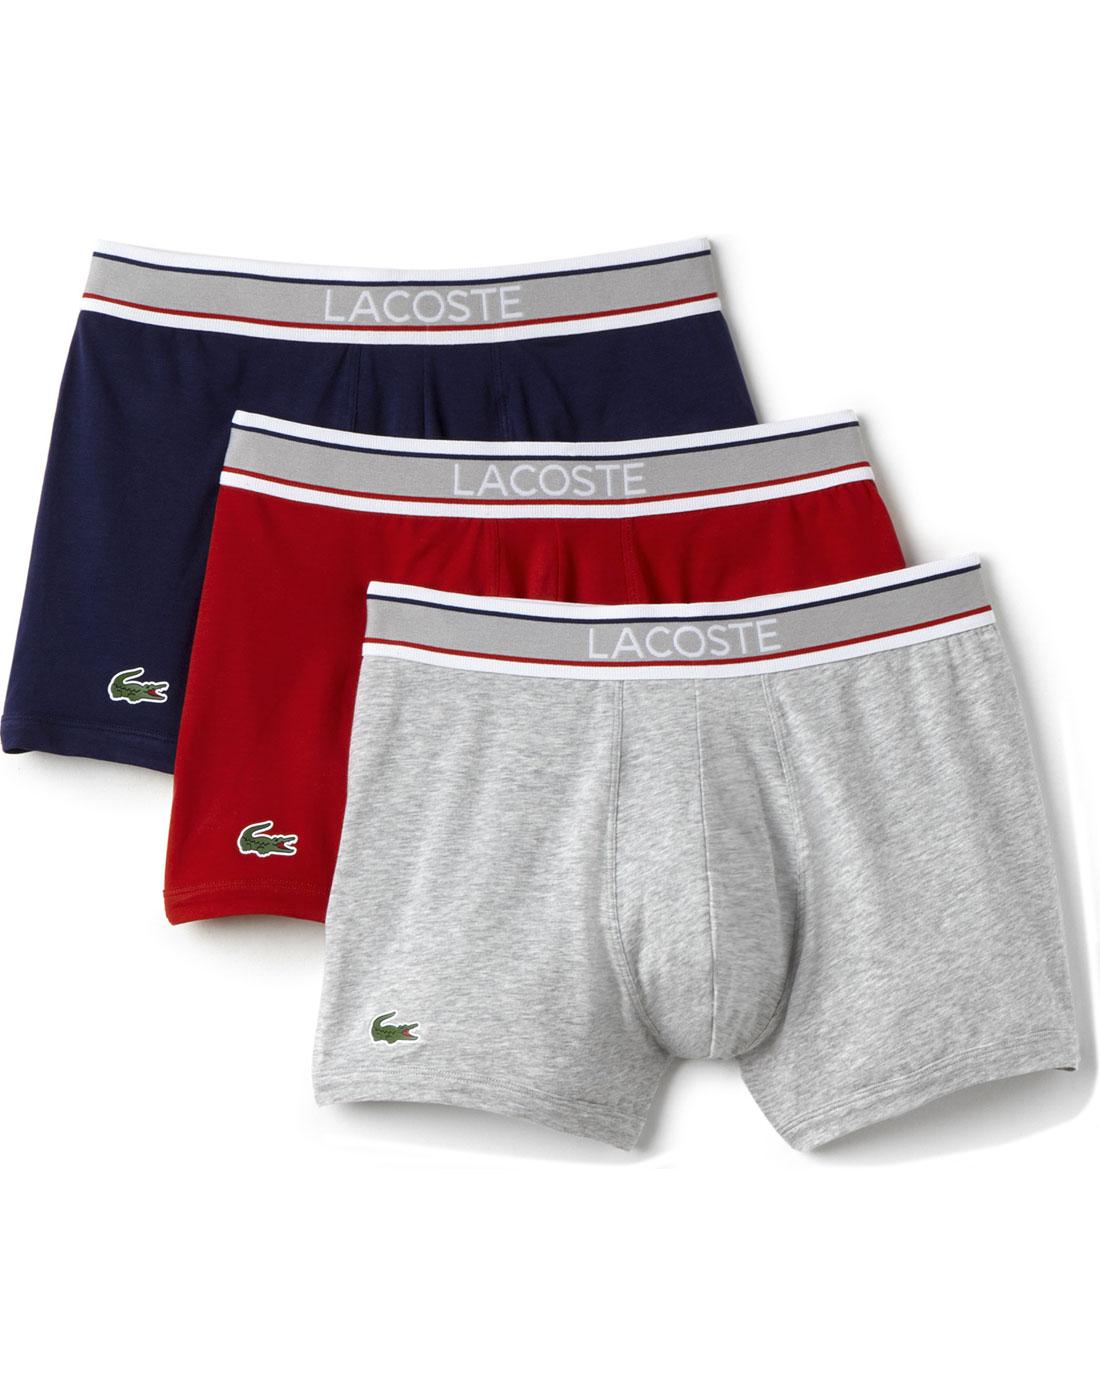 + LACOSTE Men's 3 Pack Cotton Stretch Trunks G/N/R